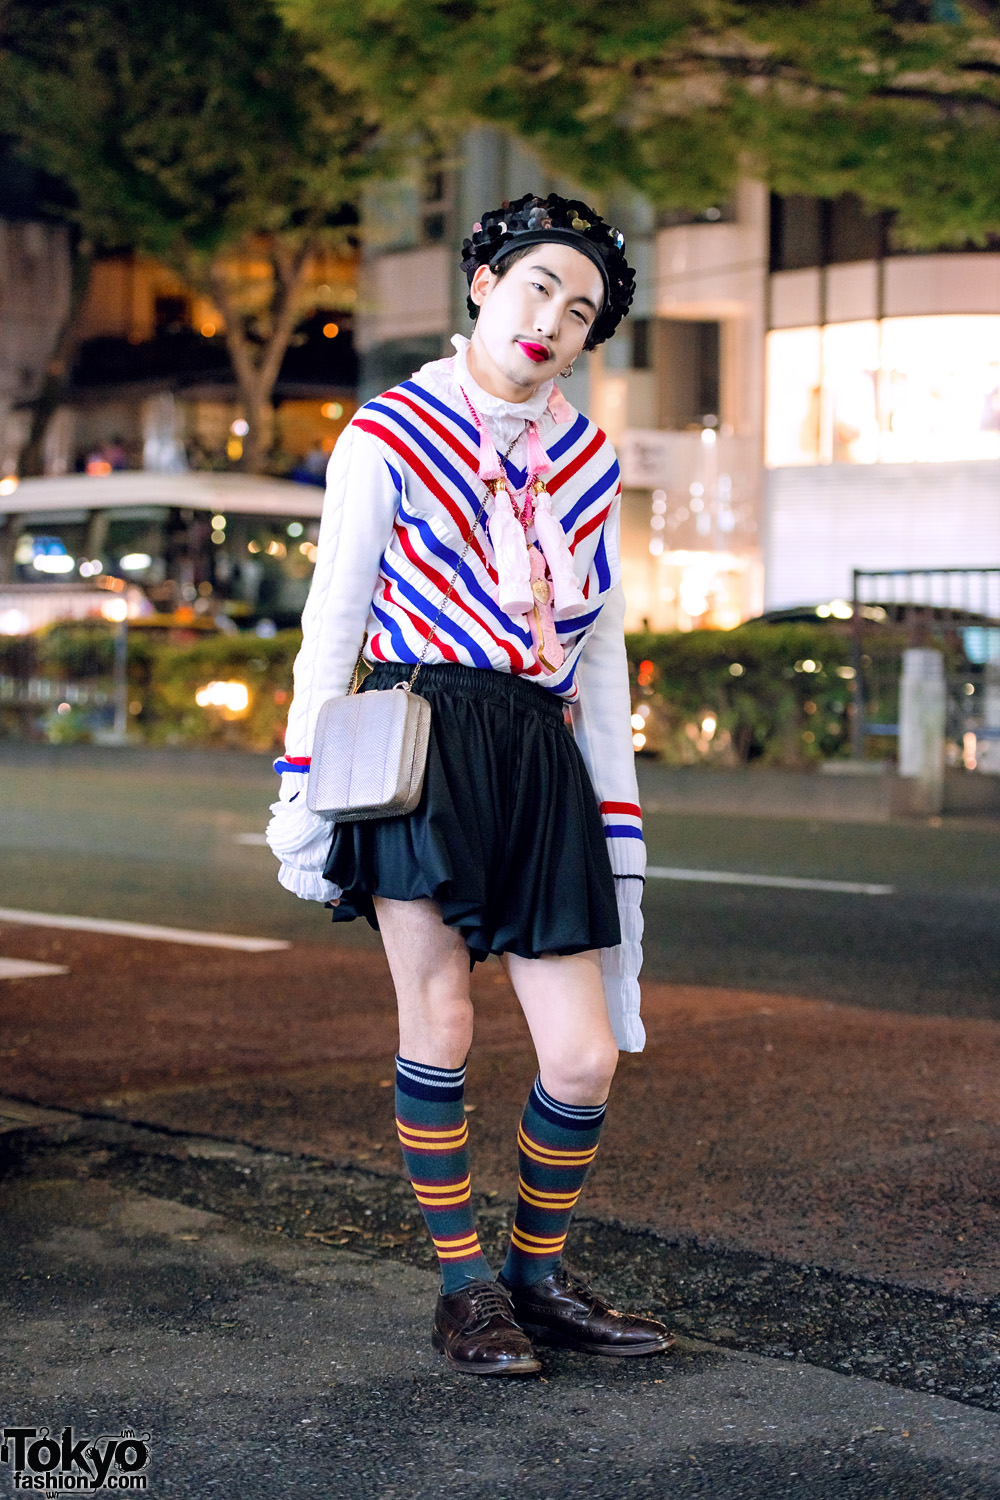 Y/Project Striped Top, Kidill Cross Necklace, Charles Jeffrey Shorts, Serpui Bag, Church’s Brogues & Sequin Hat in Harajuku